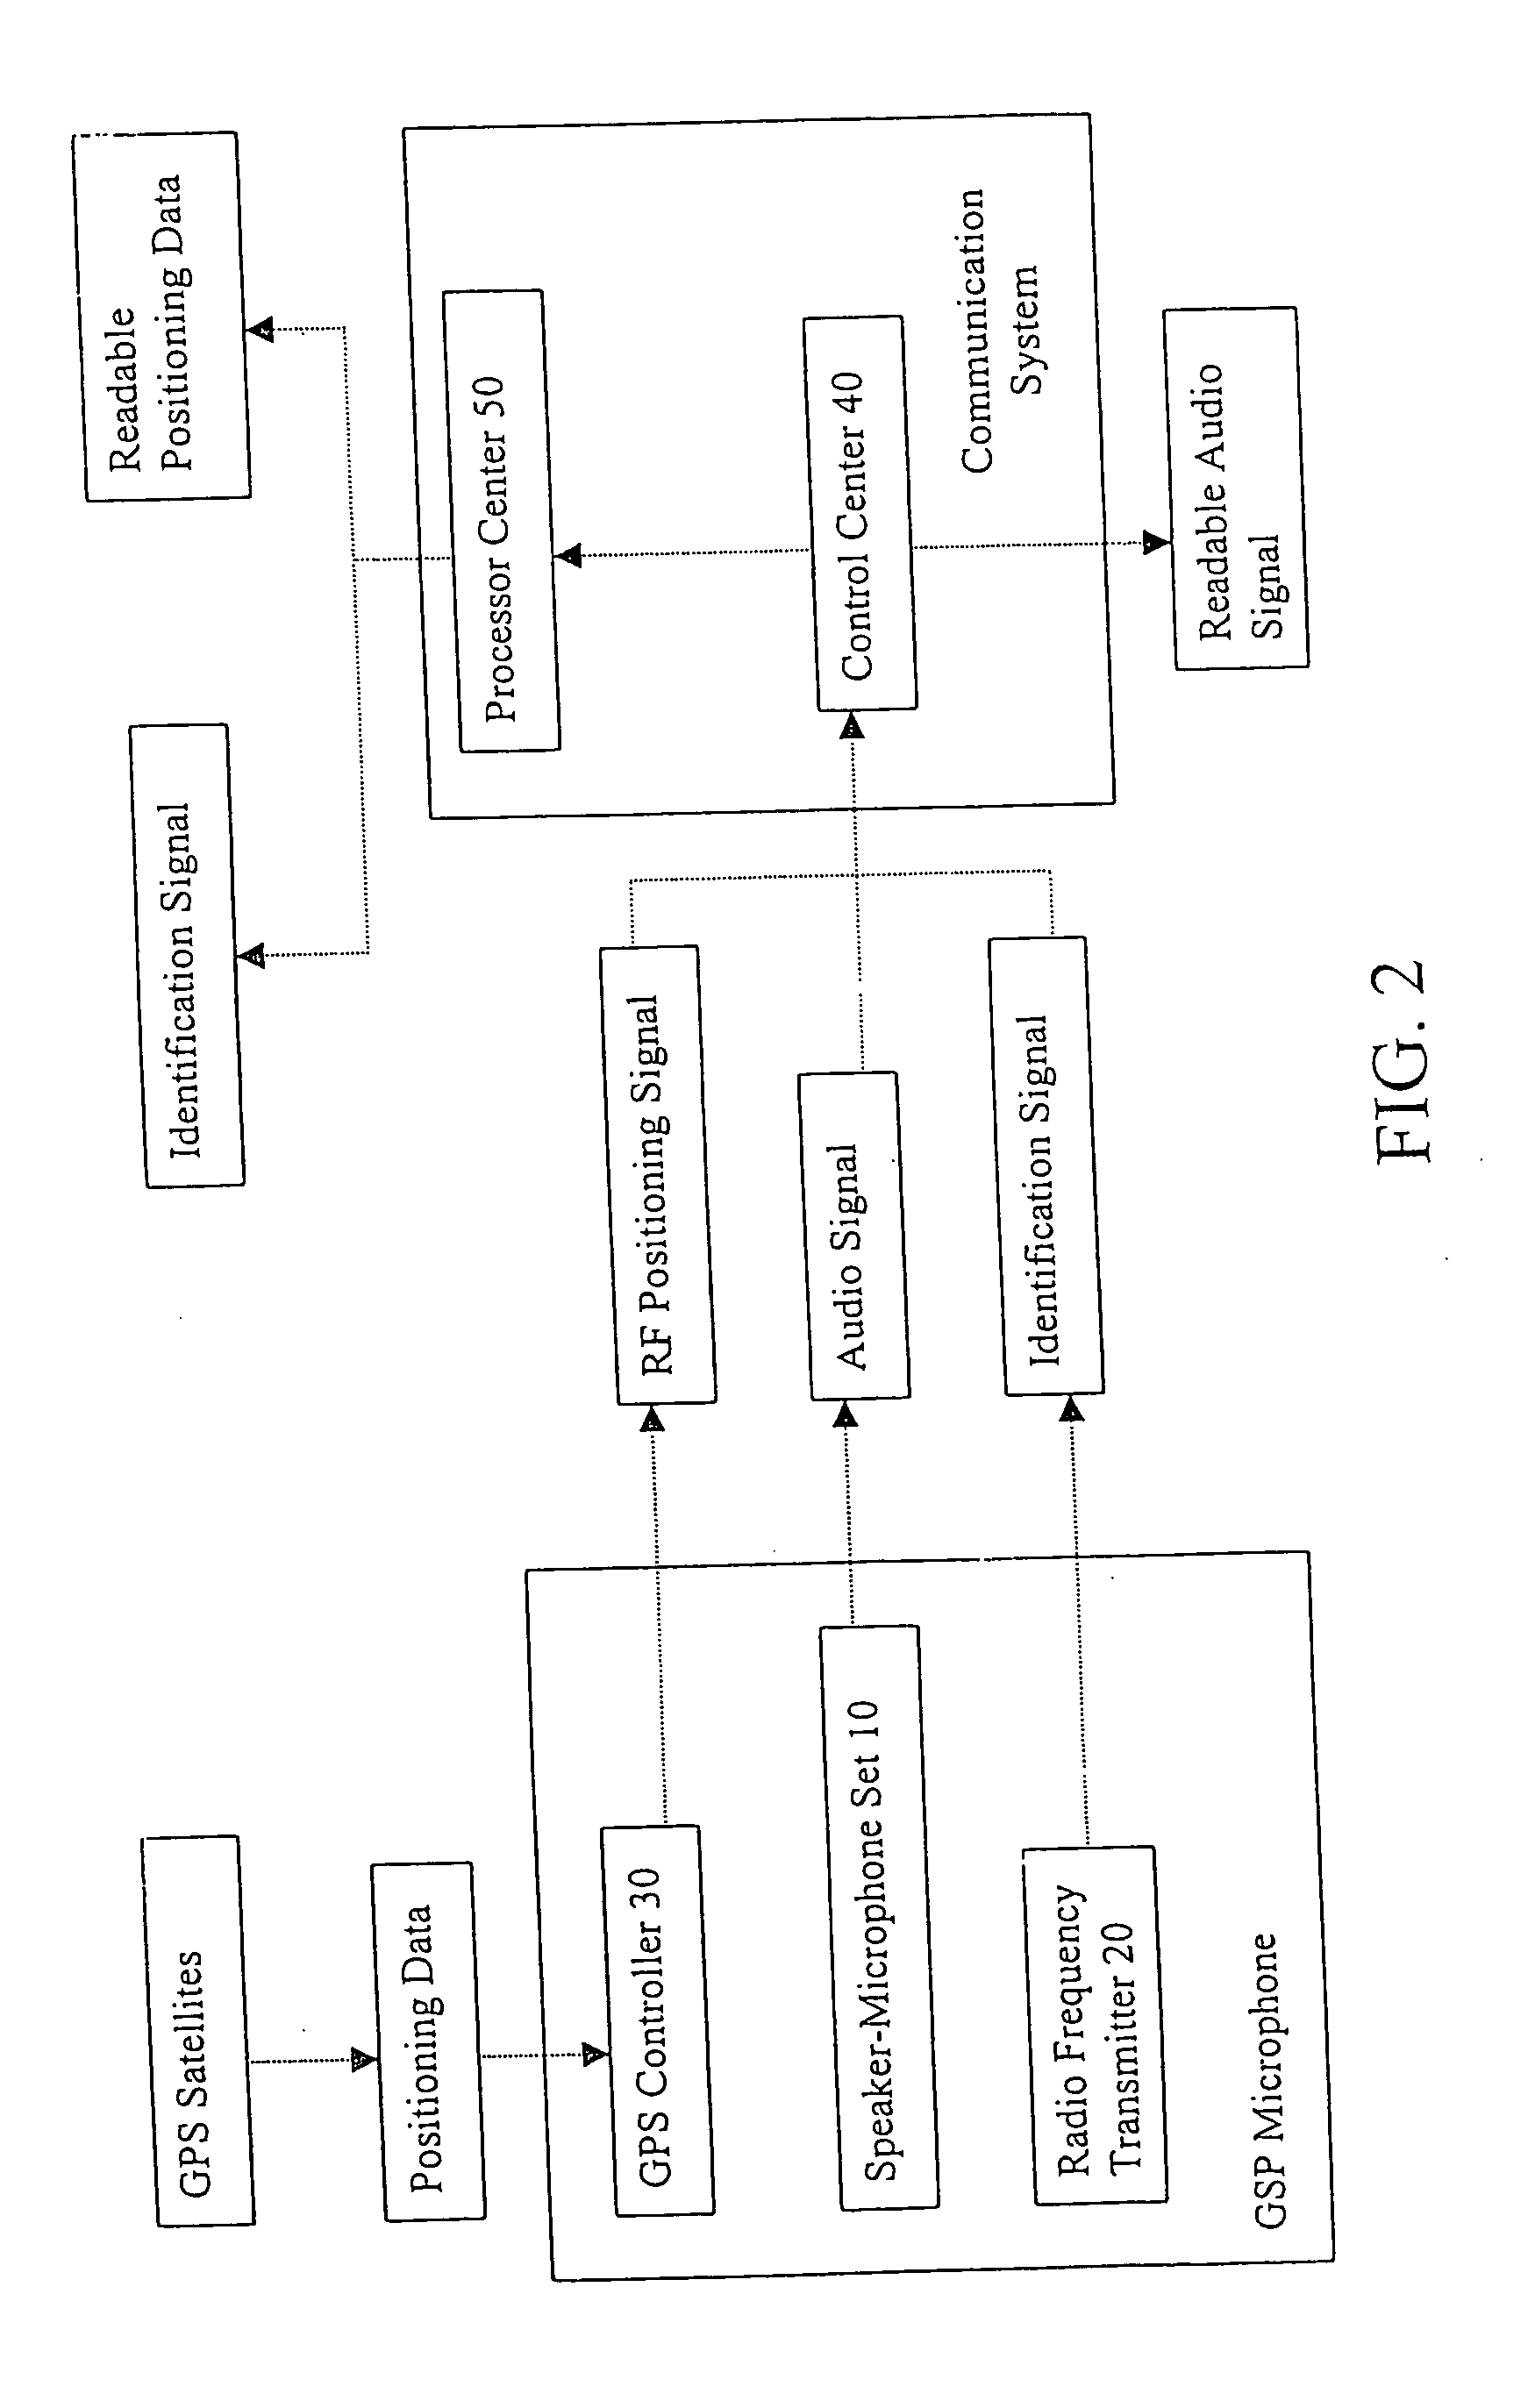 GPS-microphone for communication system